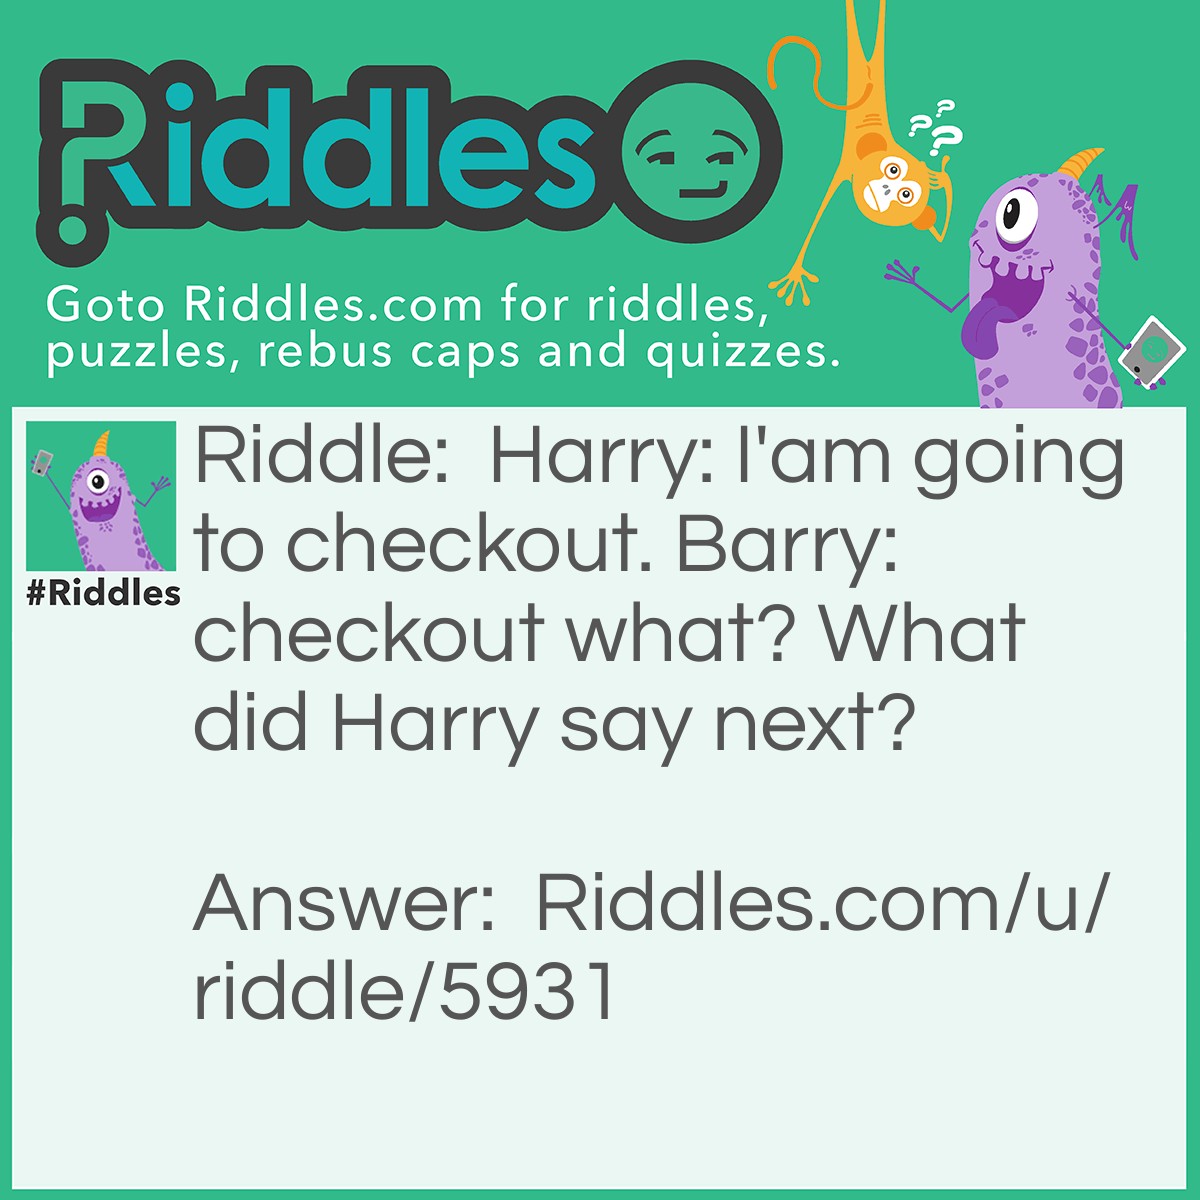 Riddle: Harry: I'am going to checkout. Barry: checkout what? What did Harry say next? Answer: Checkout of my hotel.